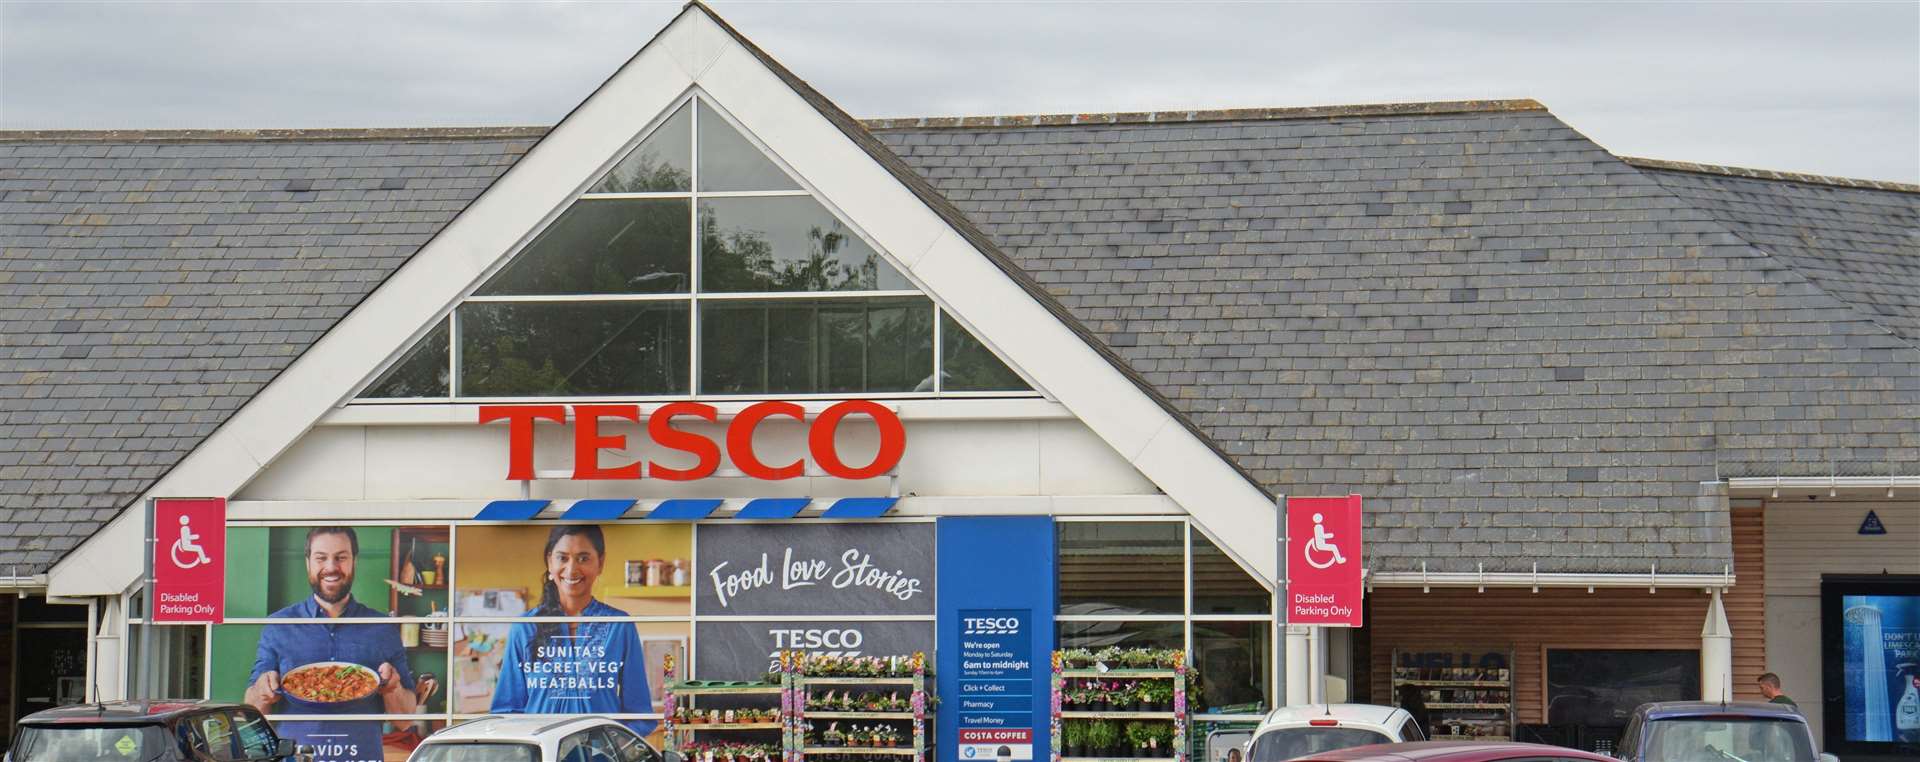 The baby products have been recalled from Tesco stores across the country